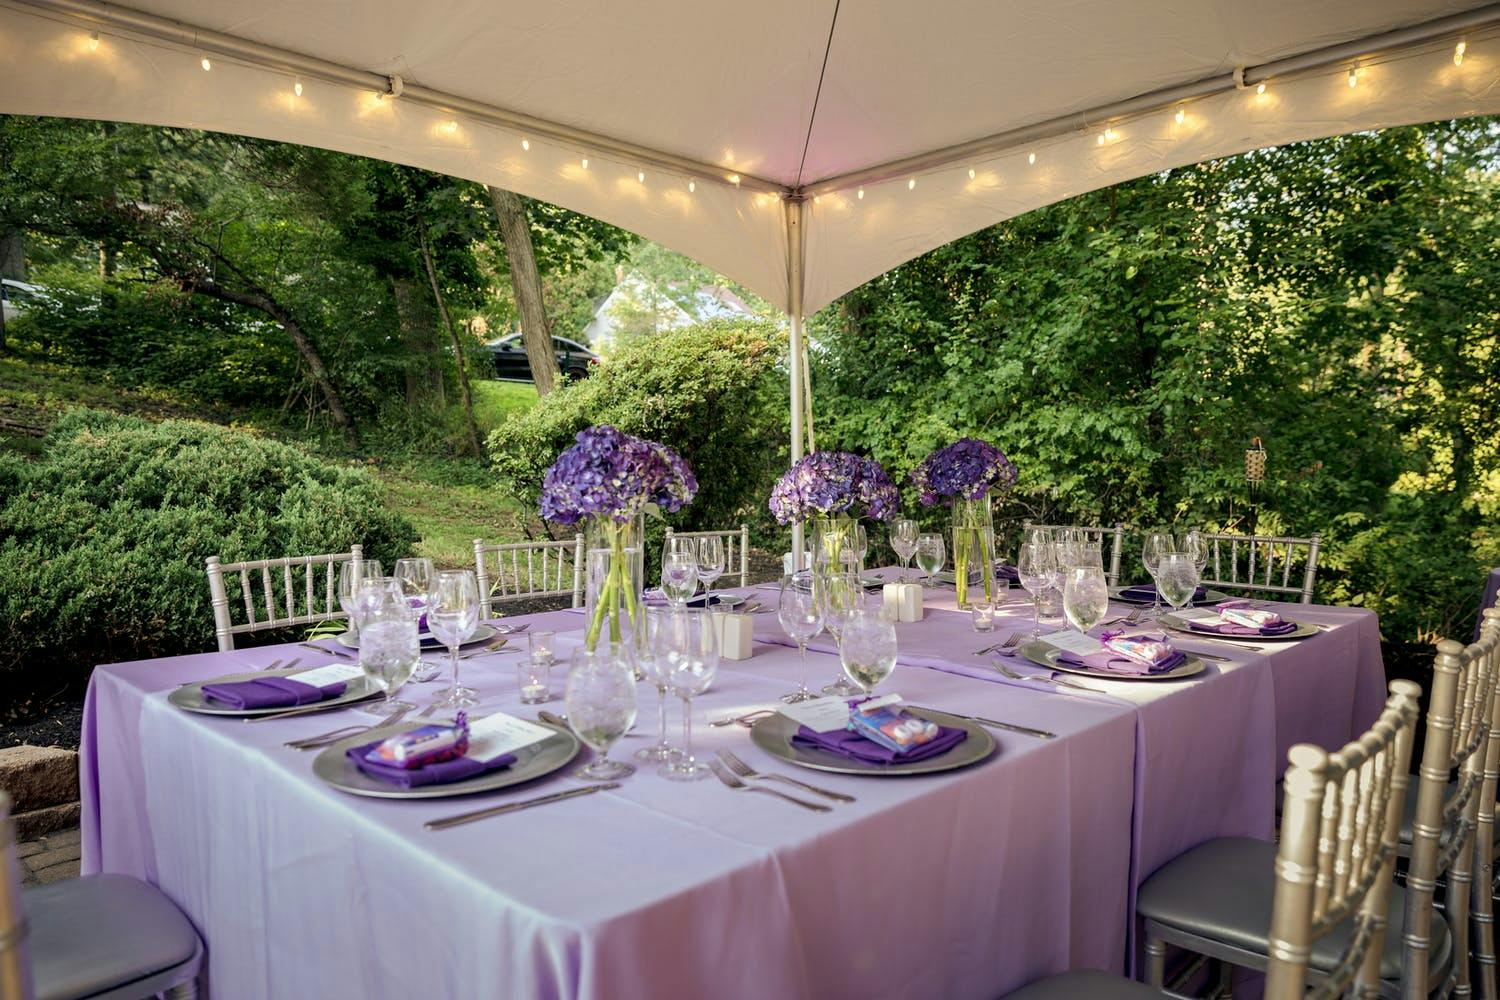 Tented Backyard Birthday Party With Violet Tablescape and Surrounding Greenery | PartySlate